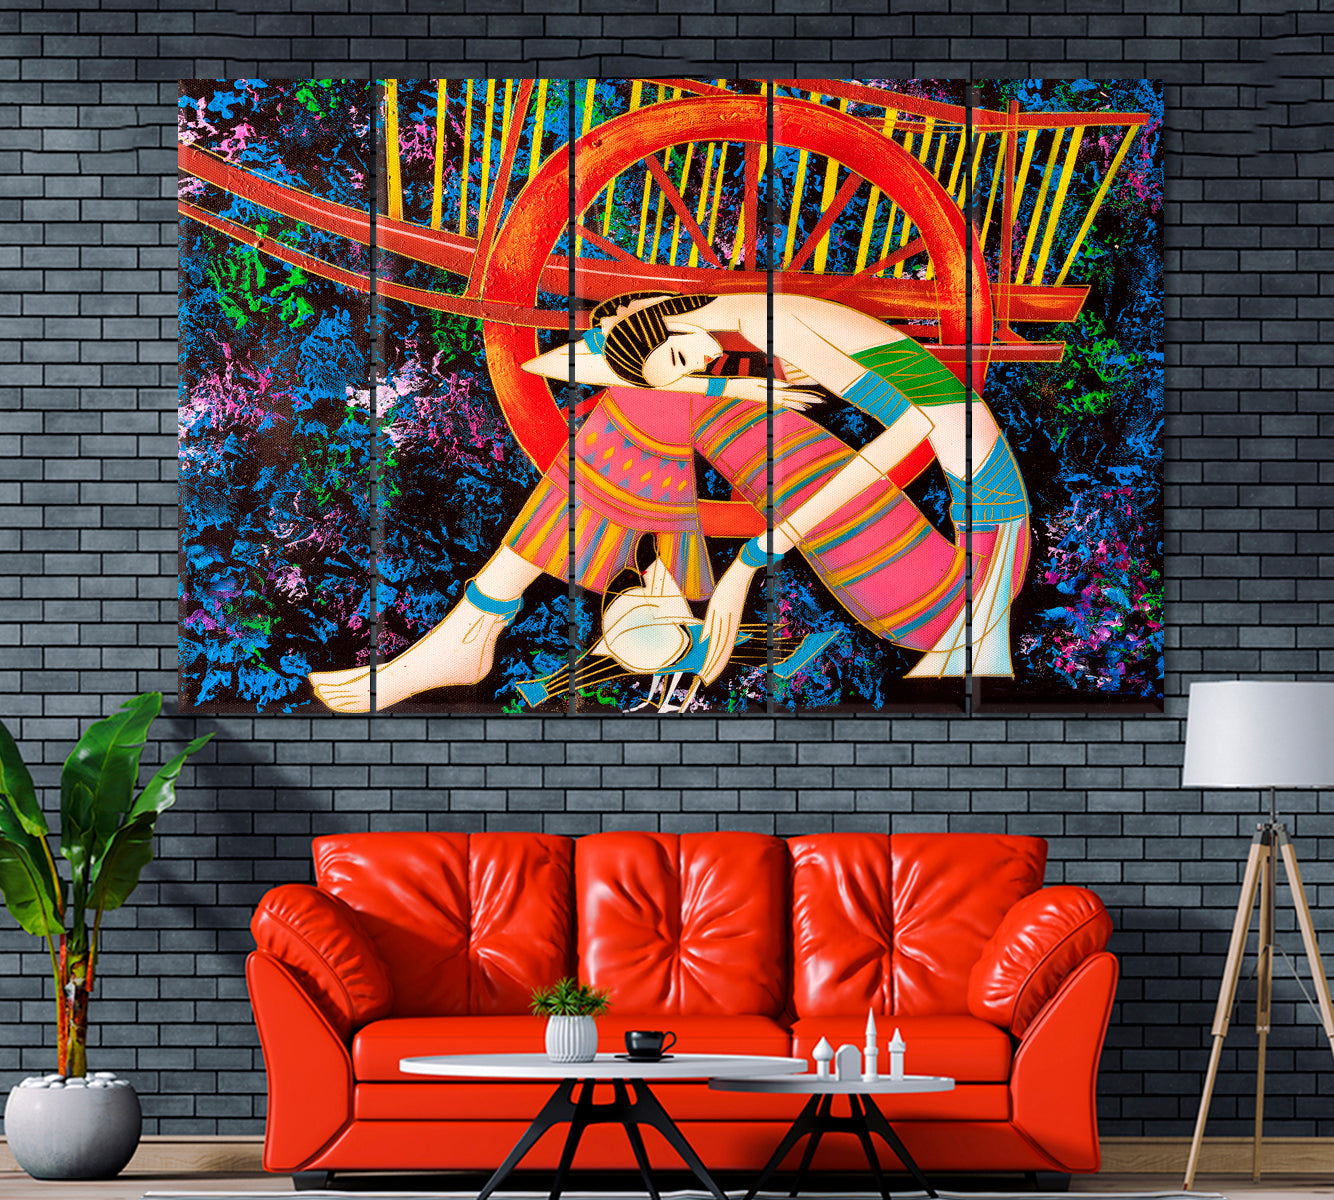 Woman with Bird Canvas Print ArtLexy 5 Panels 36"x24" inches 